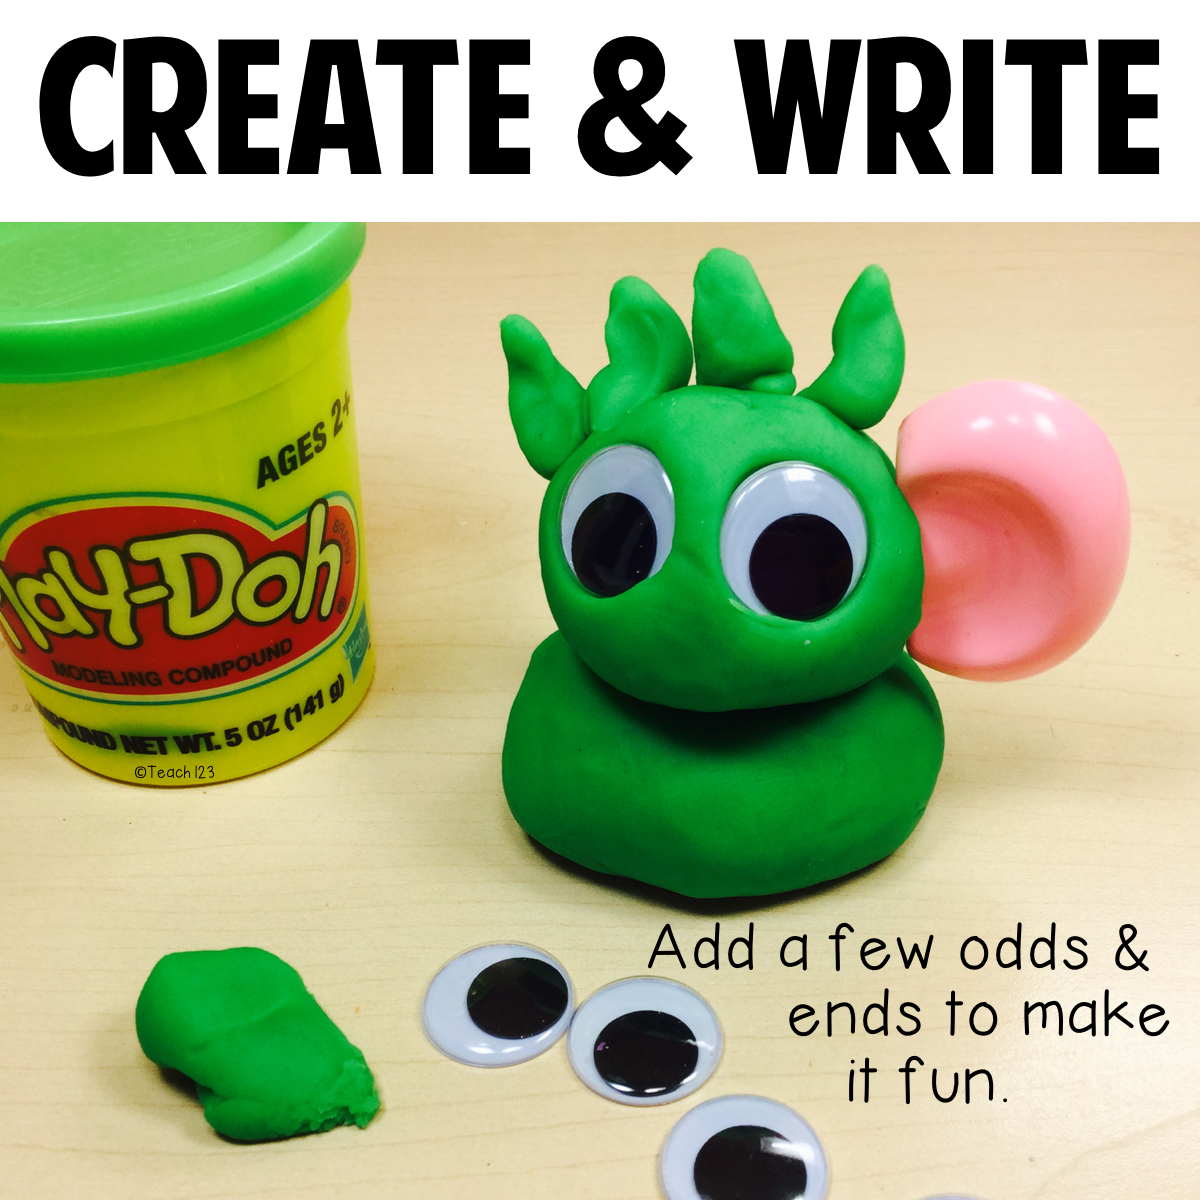 10 Fun Facts About Play-Doh